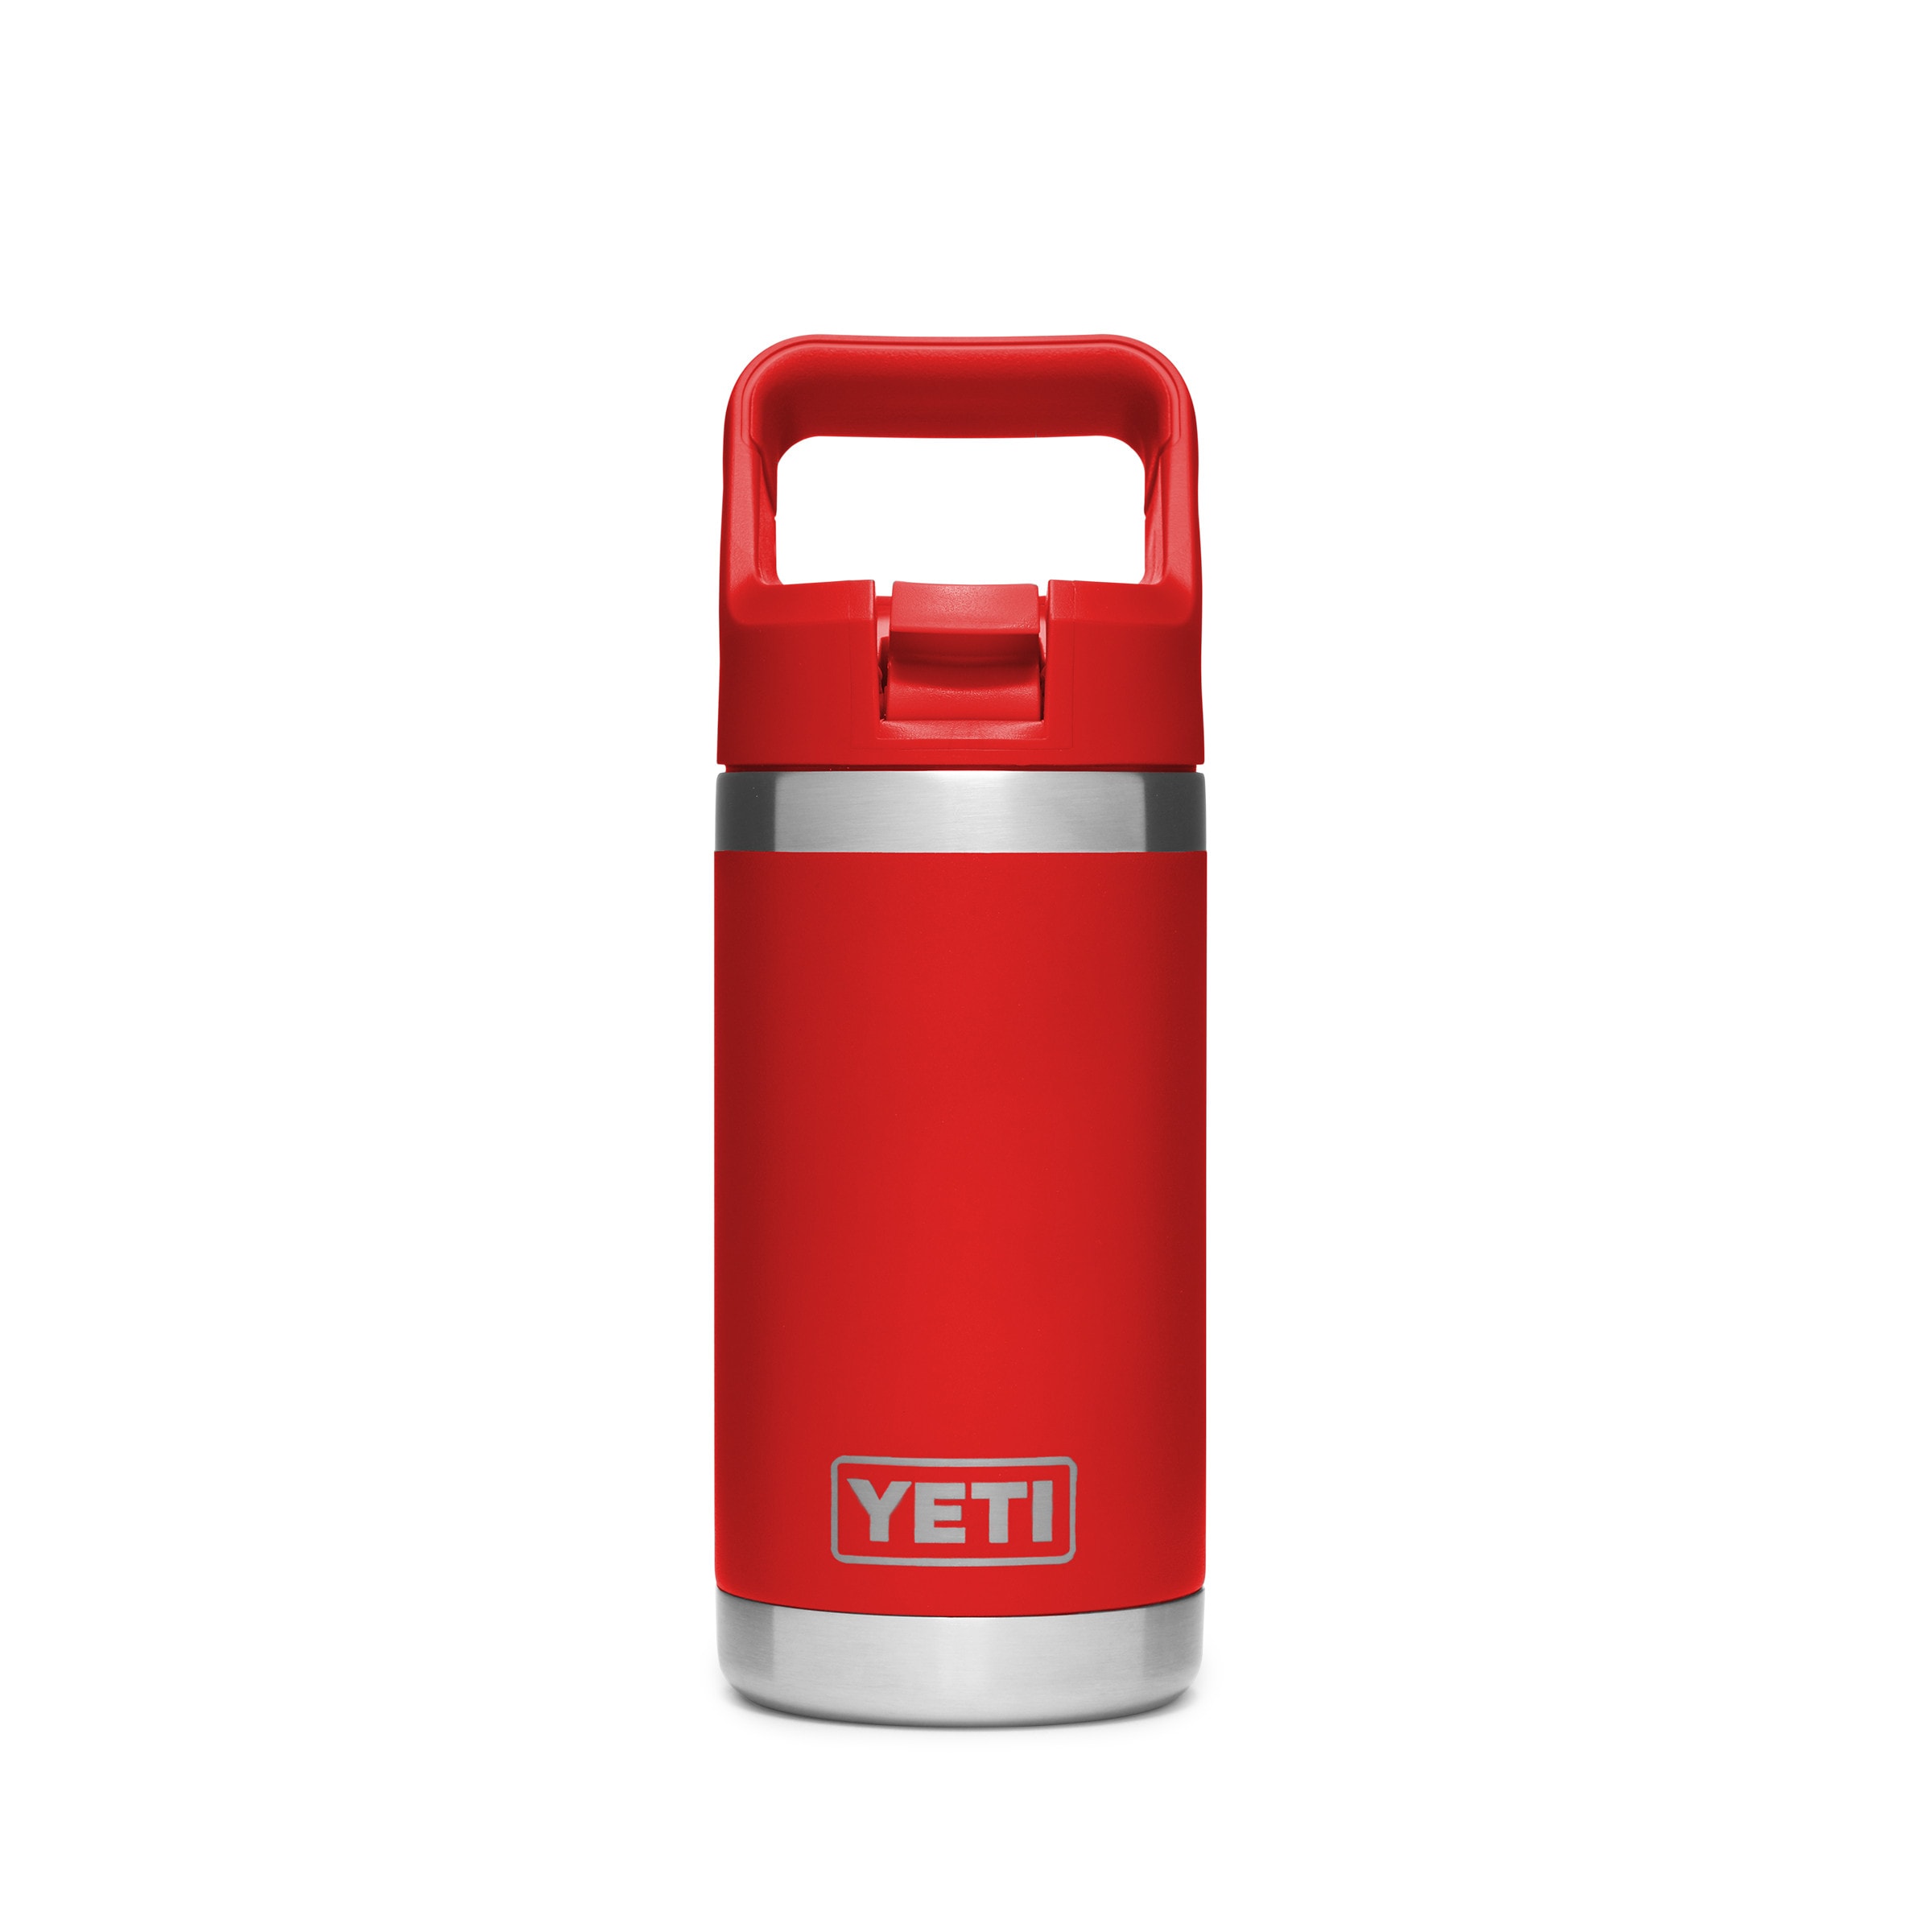 REAL YETI 14 Oz. Laser Engraved Rescue Red Stainless Steel Yeti